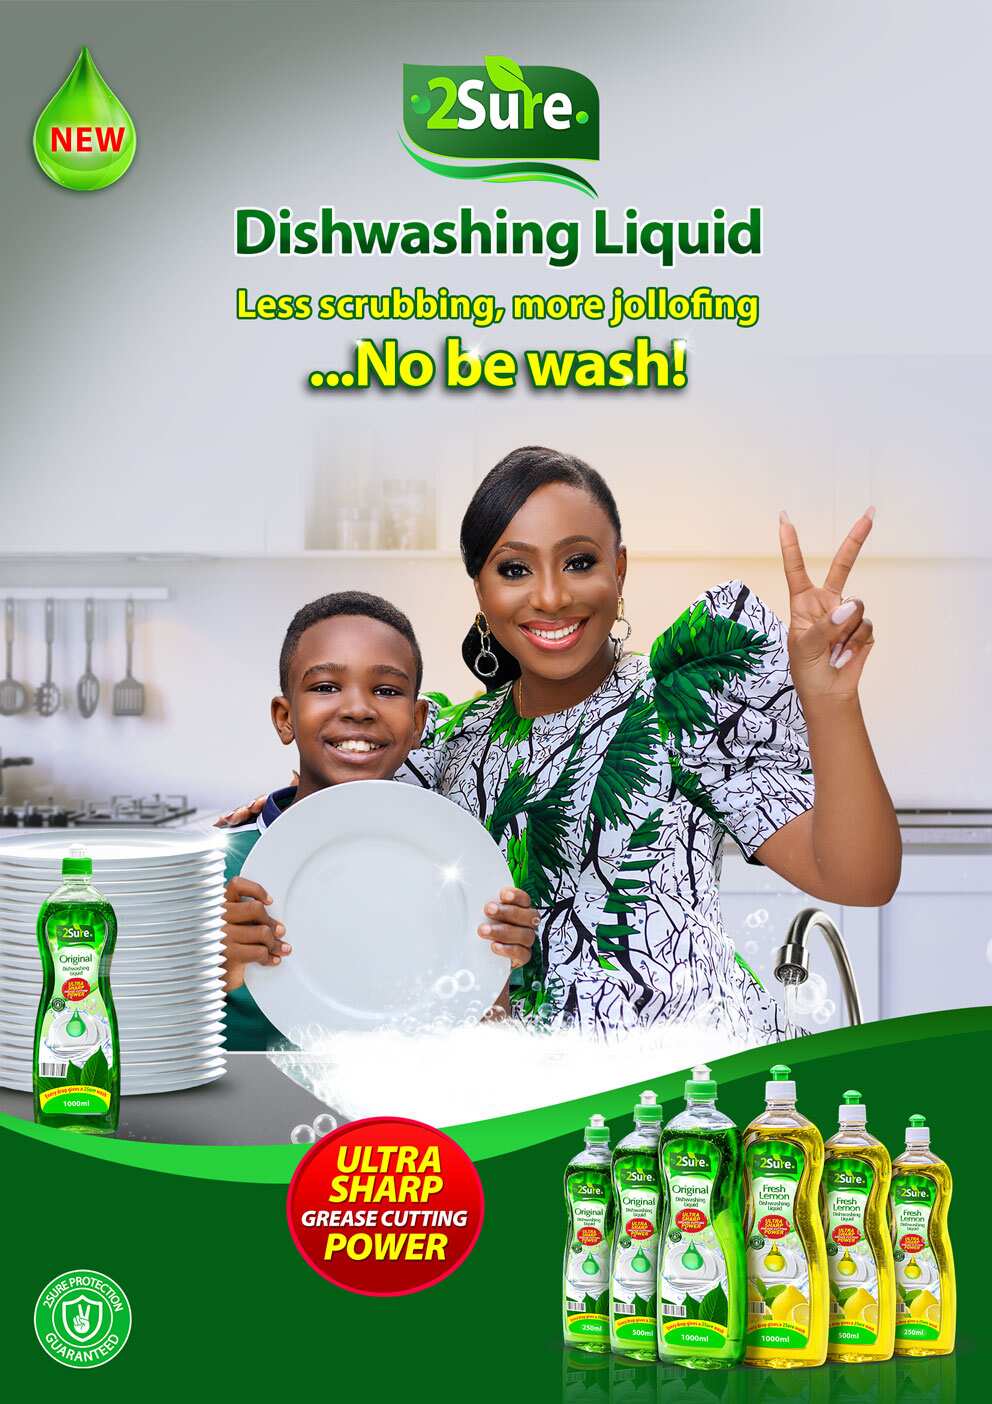 2Sure Takes the Internet By Storm in Disruptive ‘No Be Wash’ Campaign